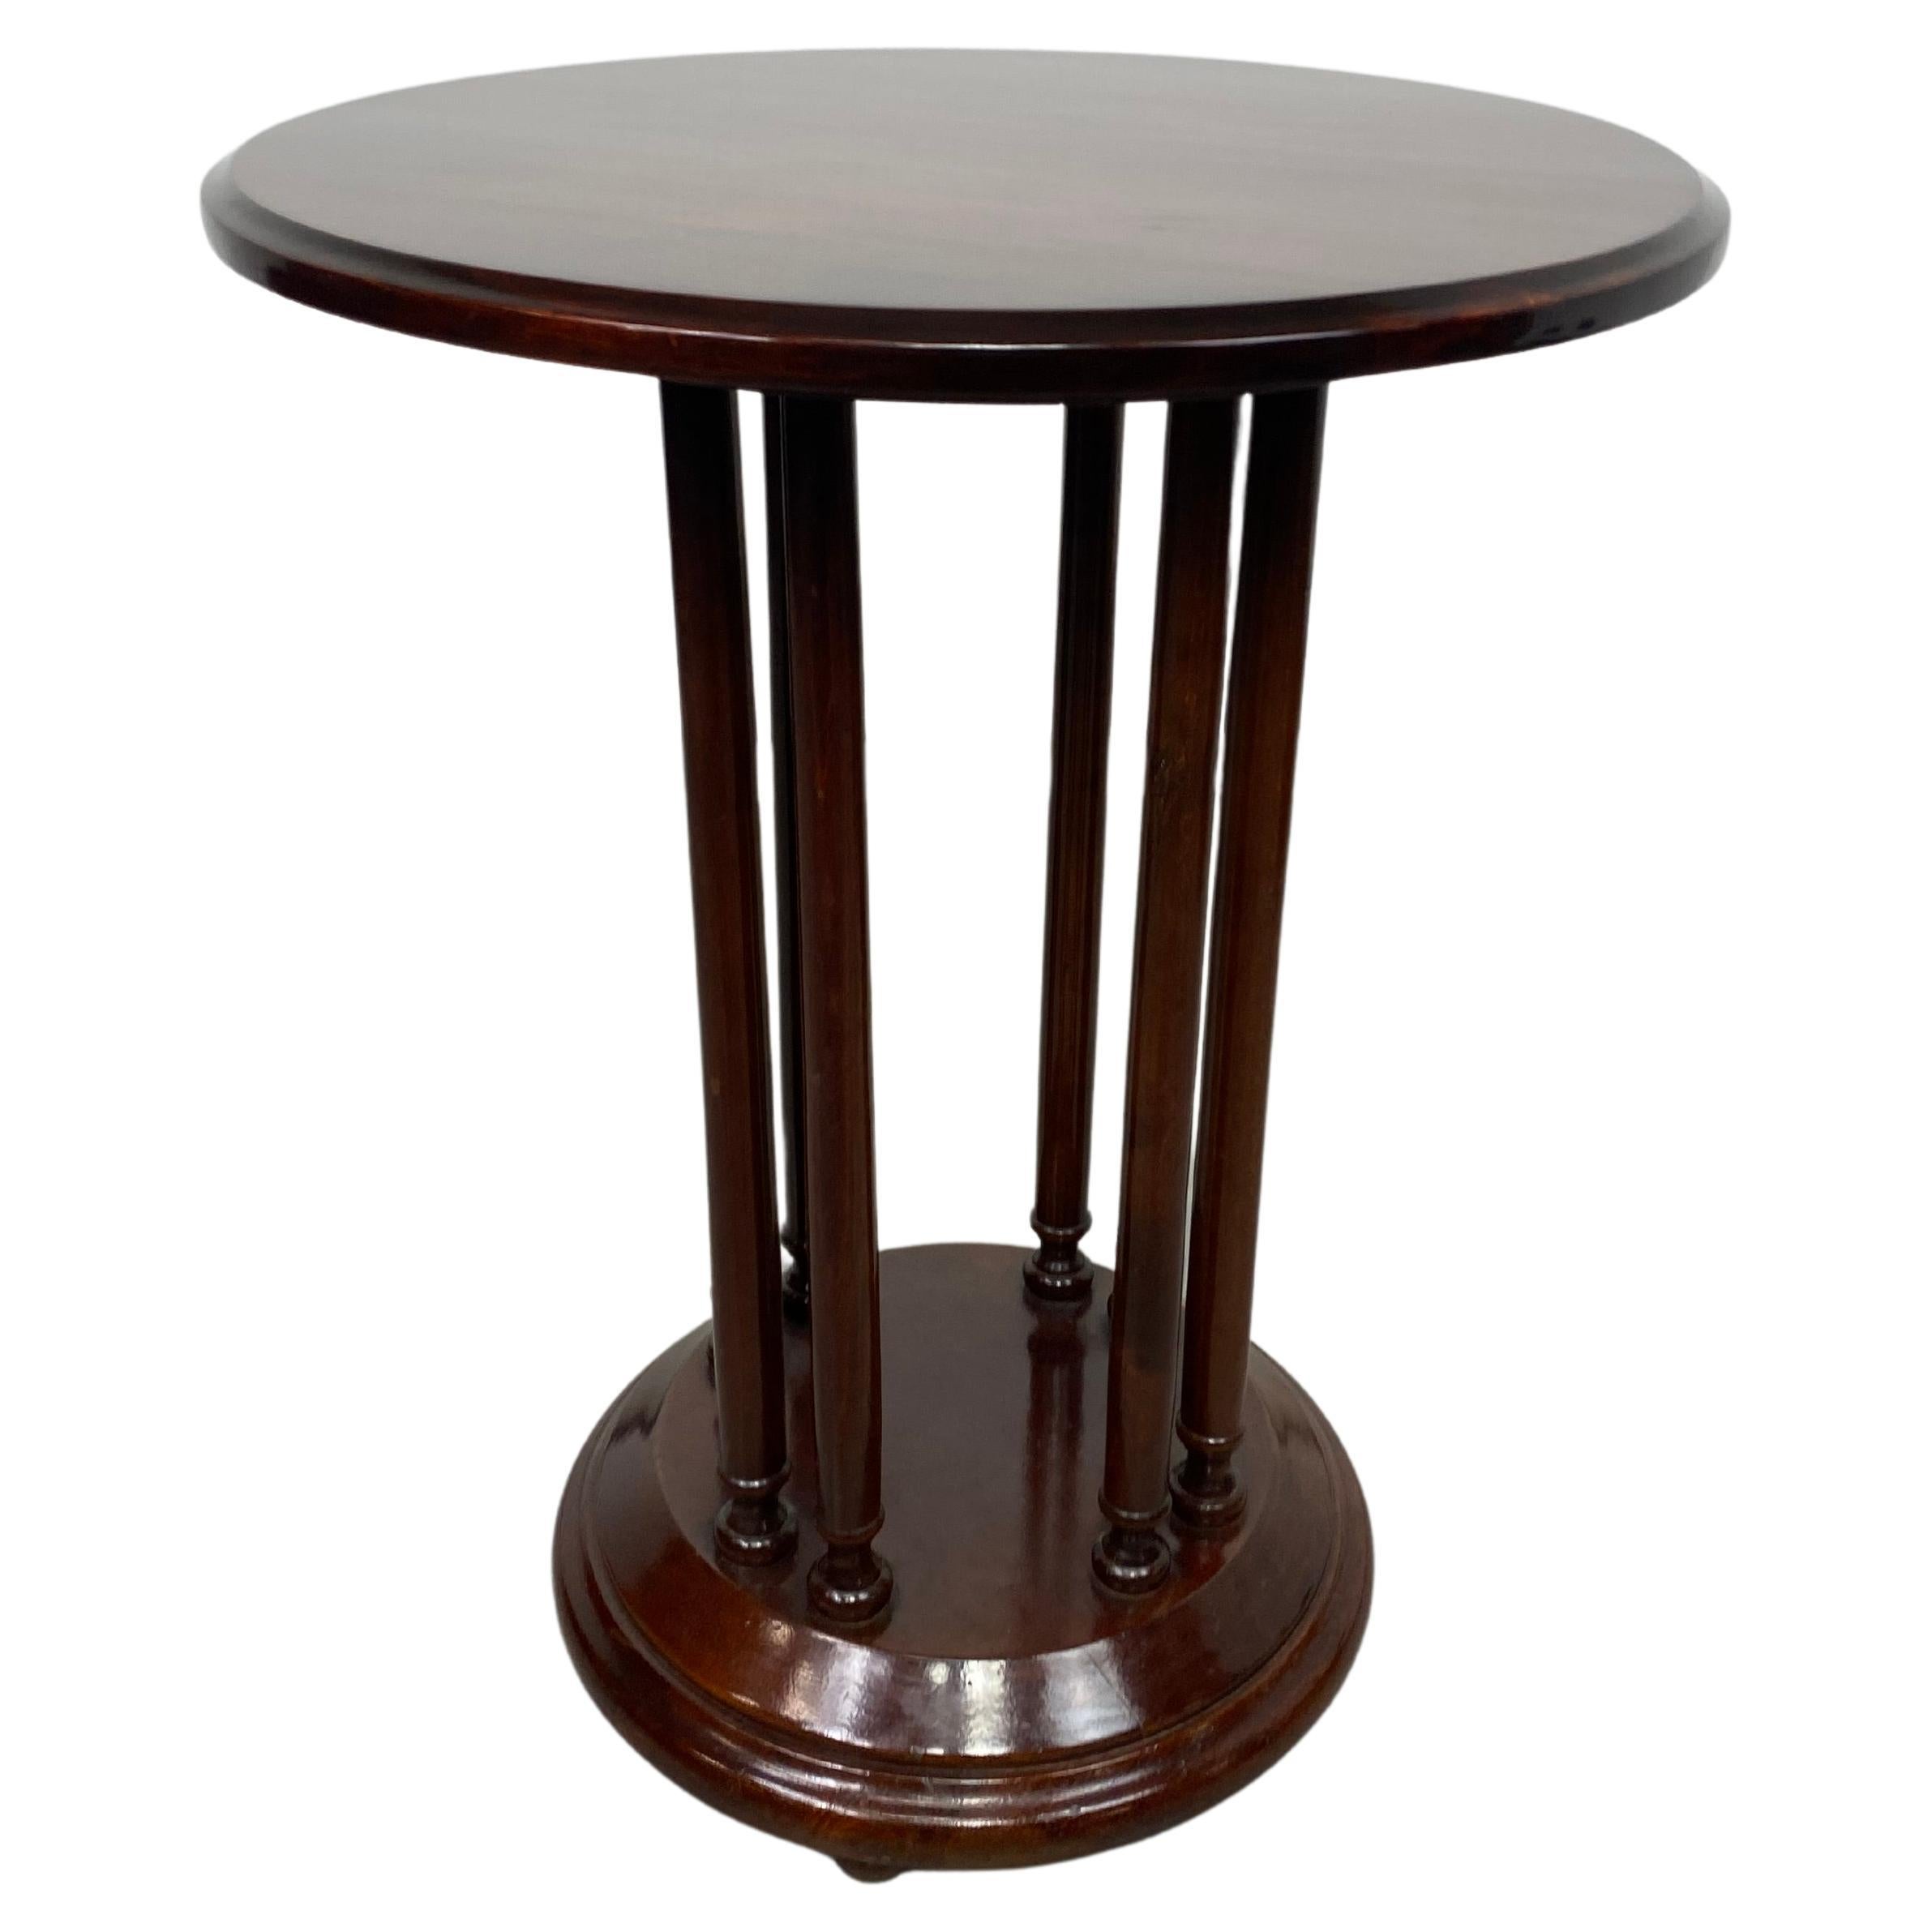 Secession coffee table by Josef Hoffmann